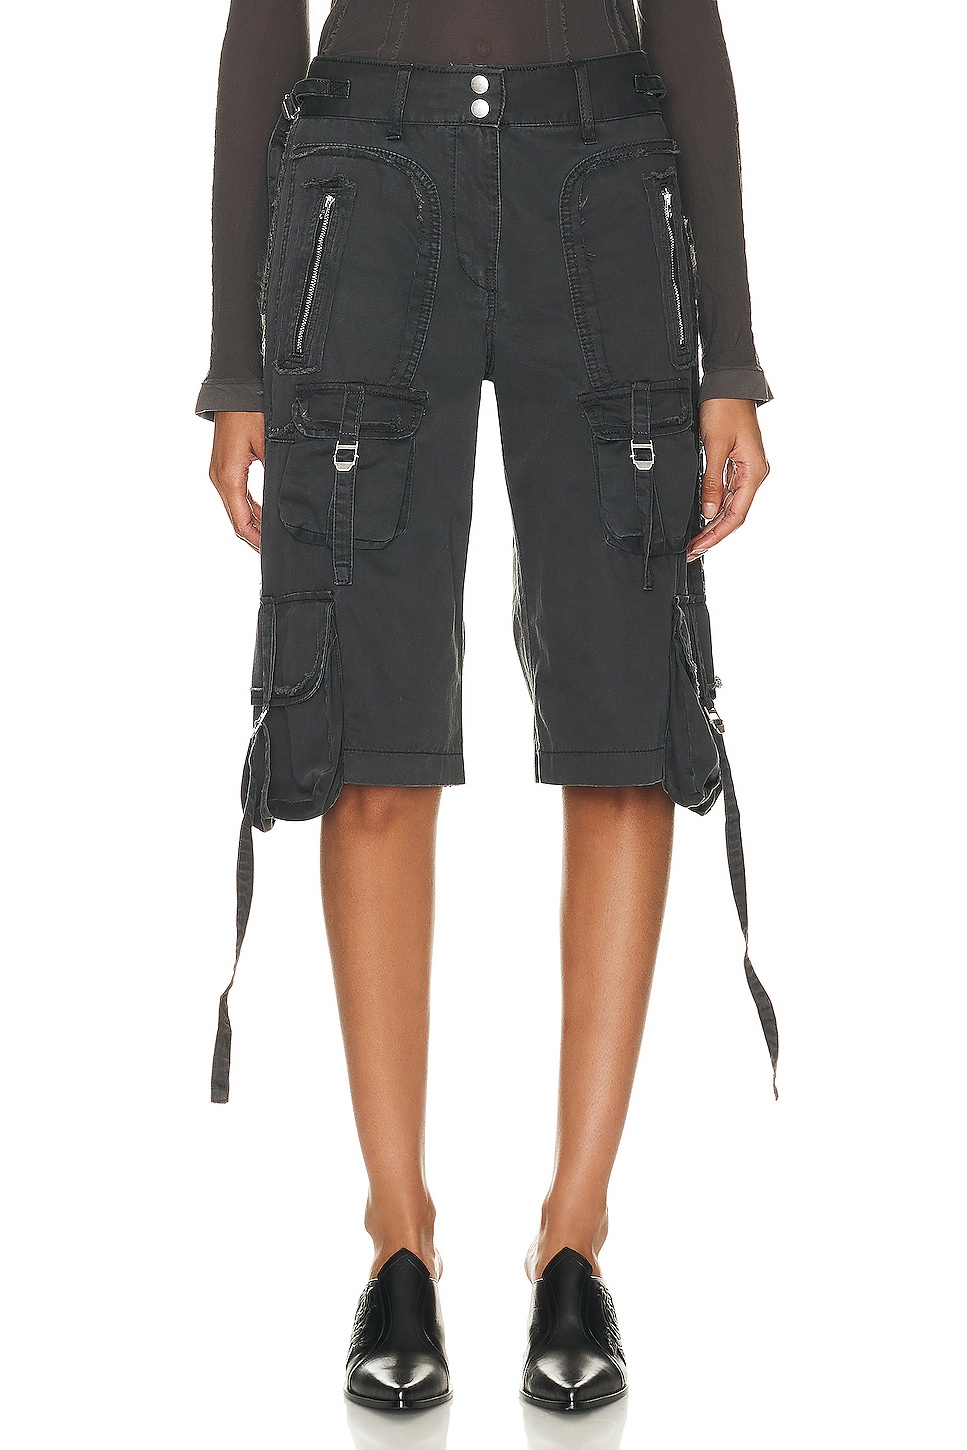 Image 1 of Acne Studios Long Short in Charcoal Grey